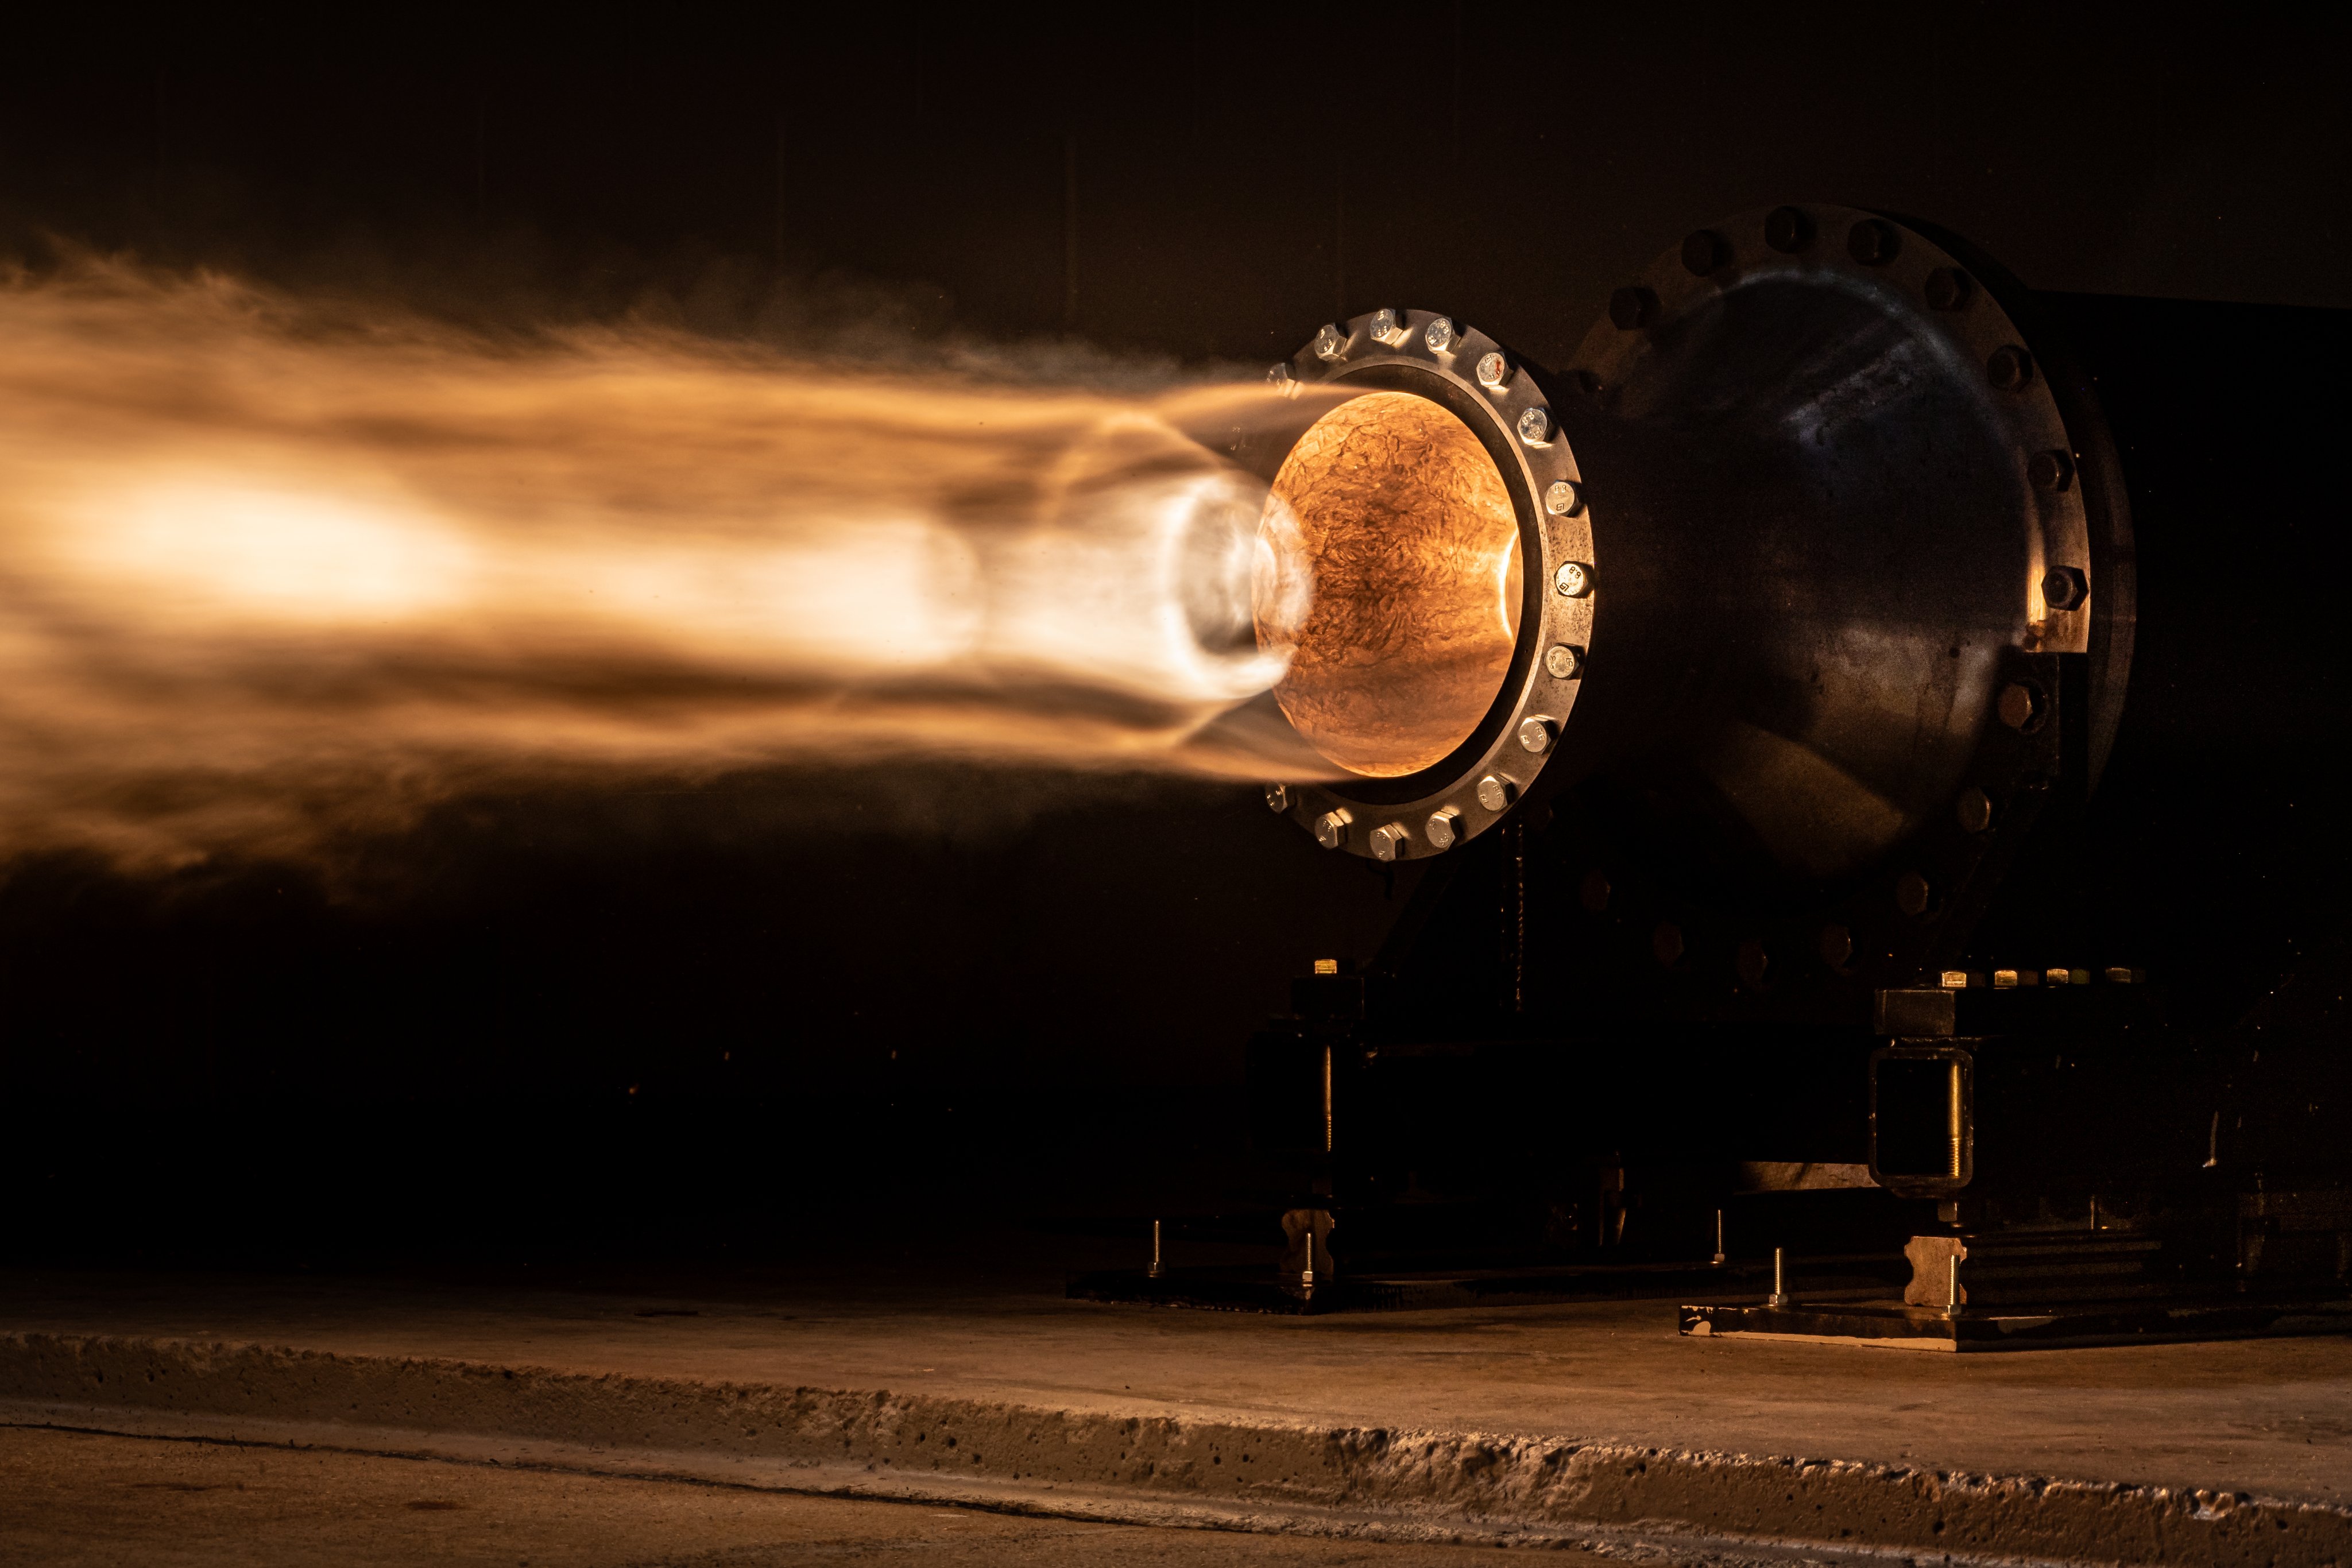 Rocket crafters has finished testing its Comet rocket engines. Photo via John Kraus, Rocket Crafters.